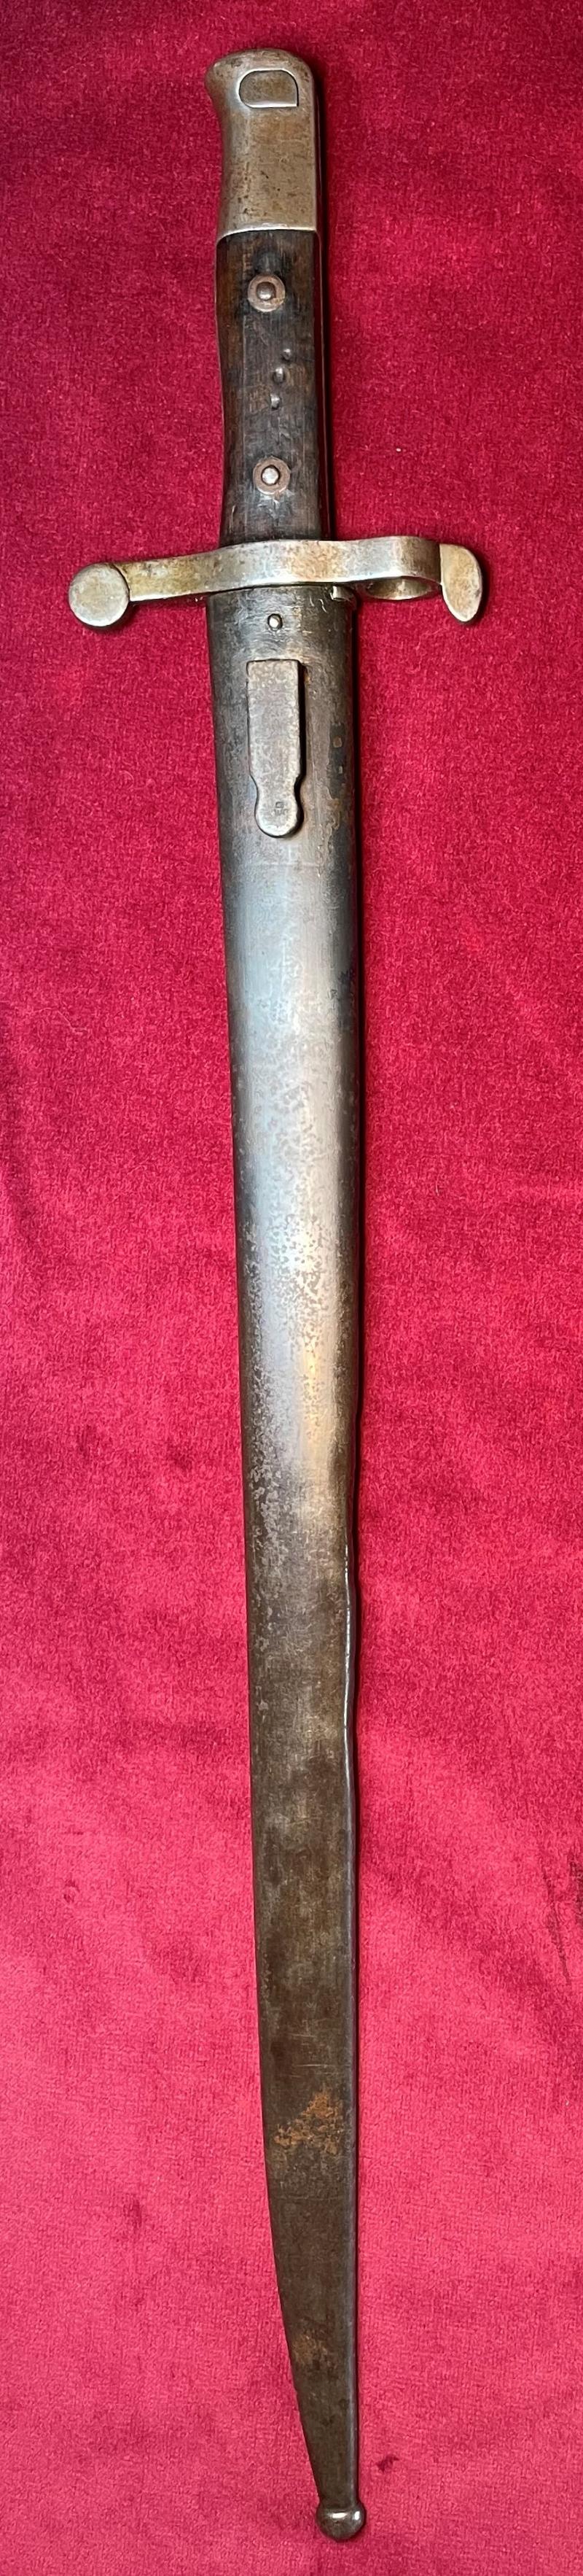 Portuguese Steyr M1885 Guedes/ M1886 Kropatcheck bayonet